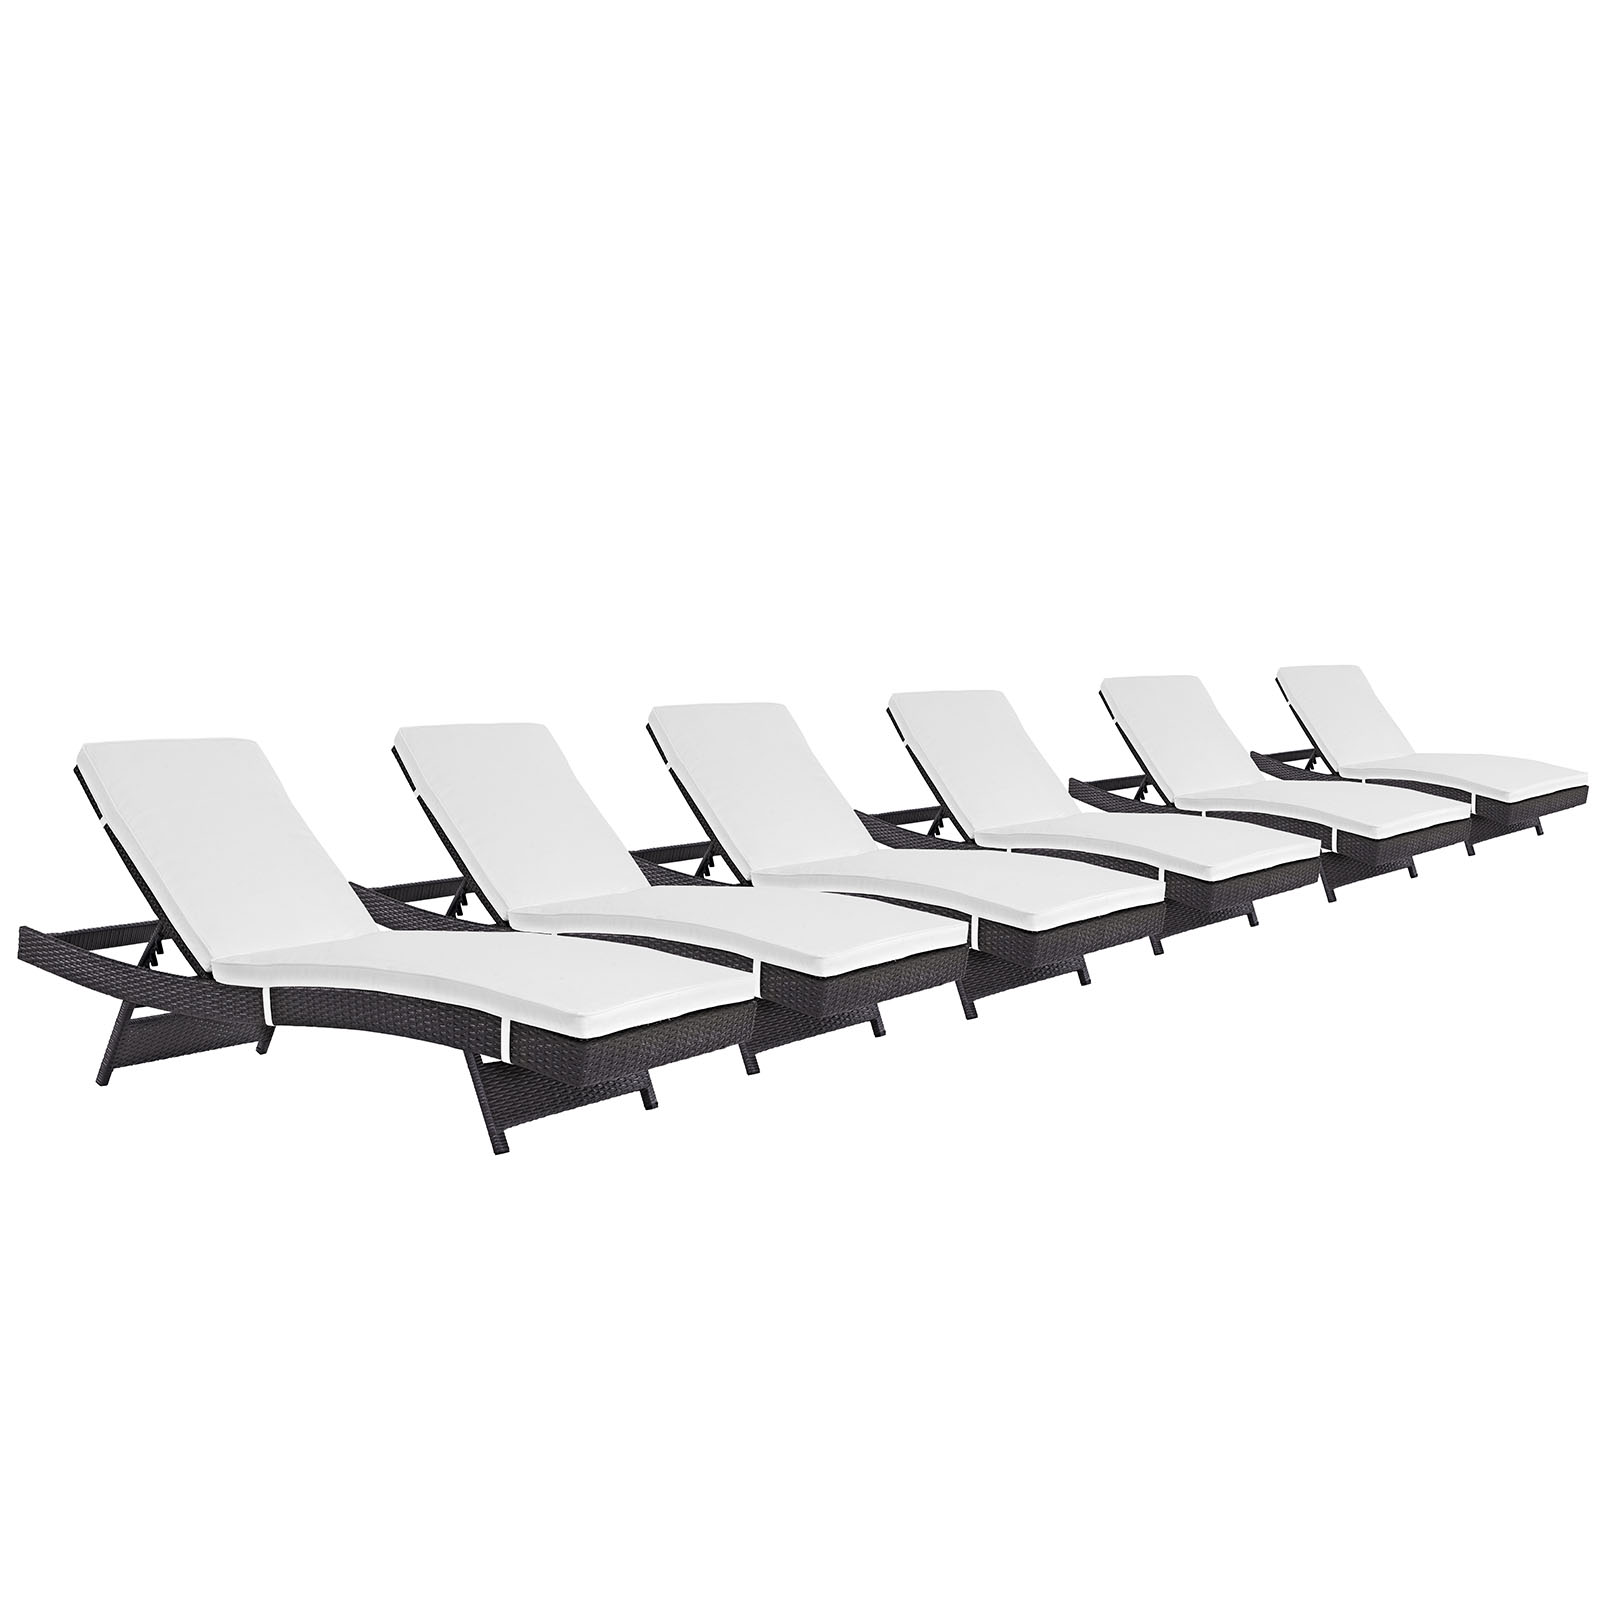 Modway Convene Chaise Outdoor Patio Set of 6 in Espresso White - image 2 of 5